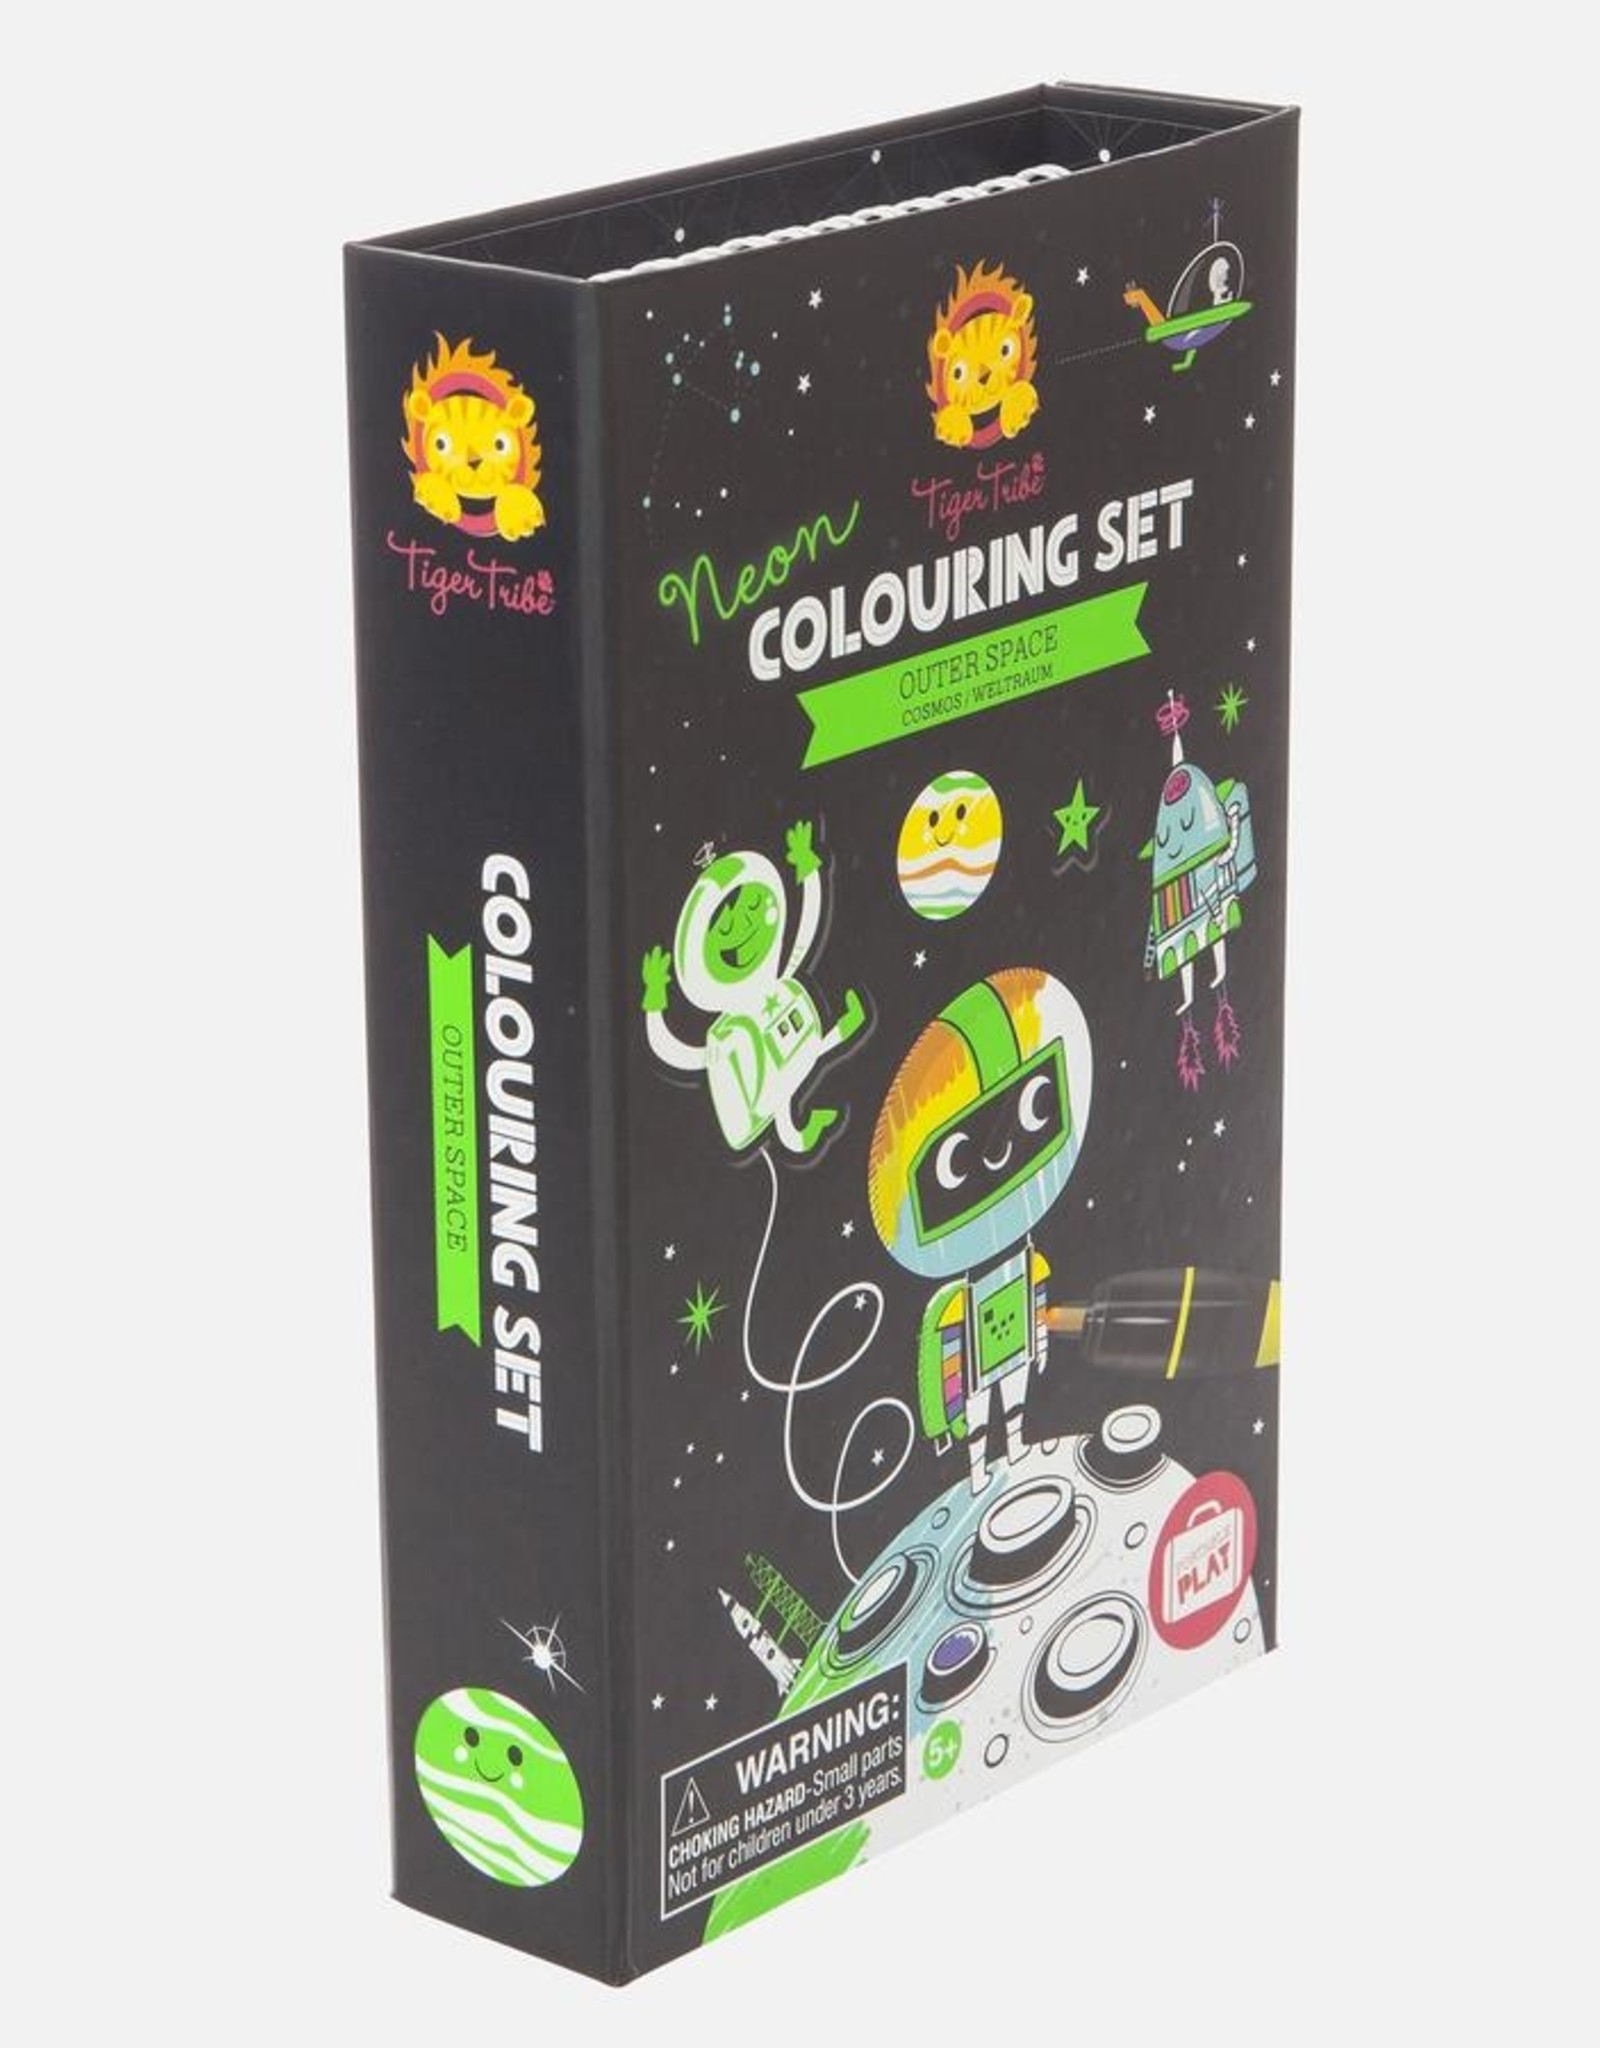 Tiger Tribe Tiger Tribe - Colouring  Set Outer Space